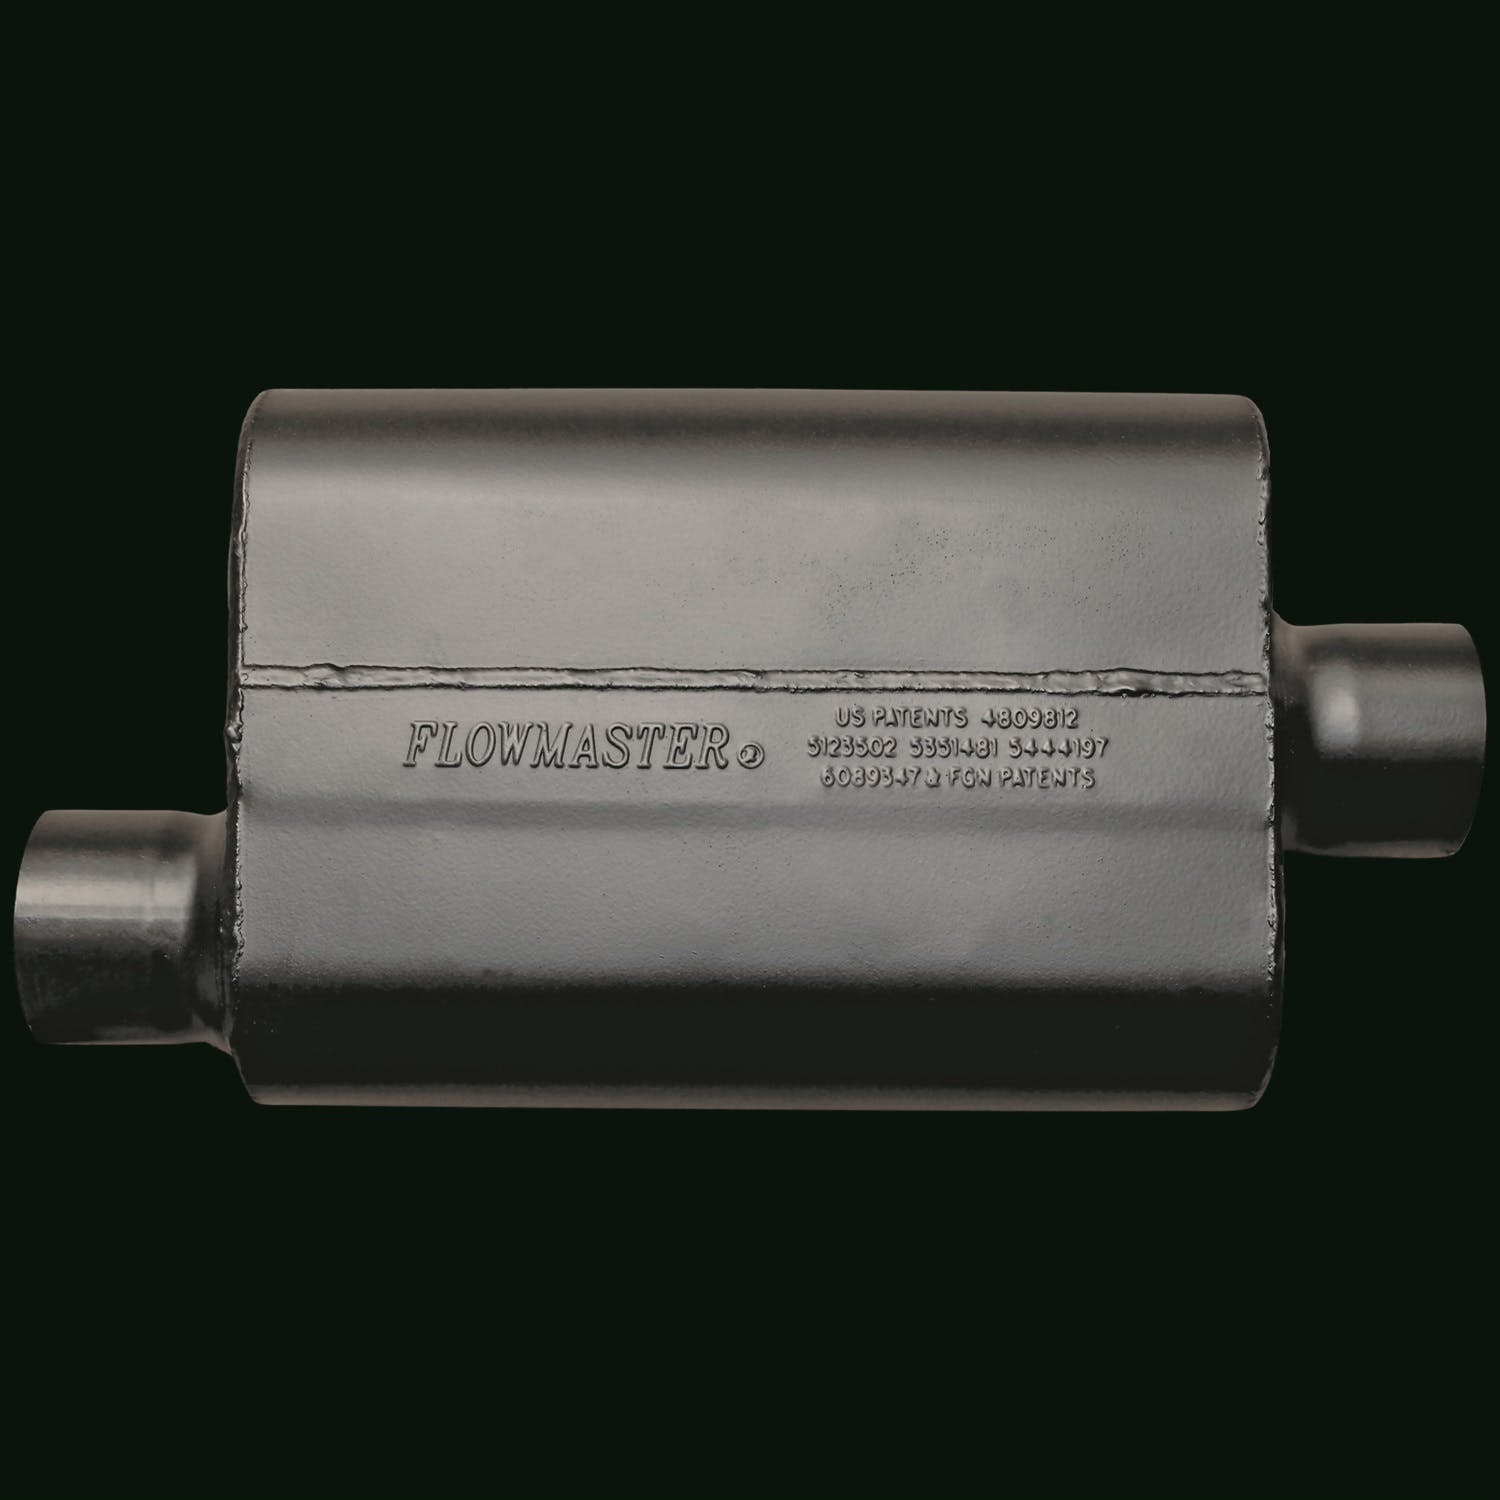 Flowmaster 942546 2.5 IN(O)/OUT(C) SUPER 44 SERIES